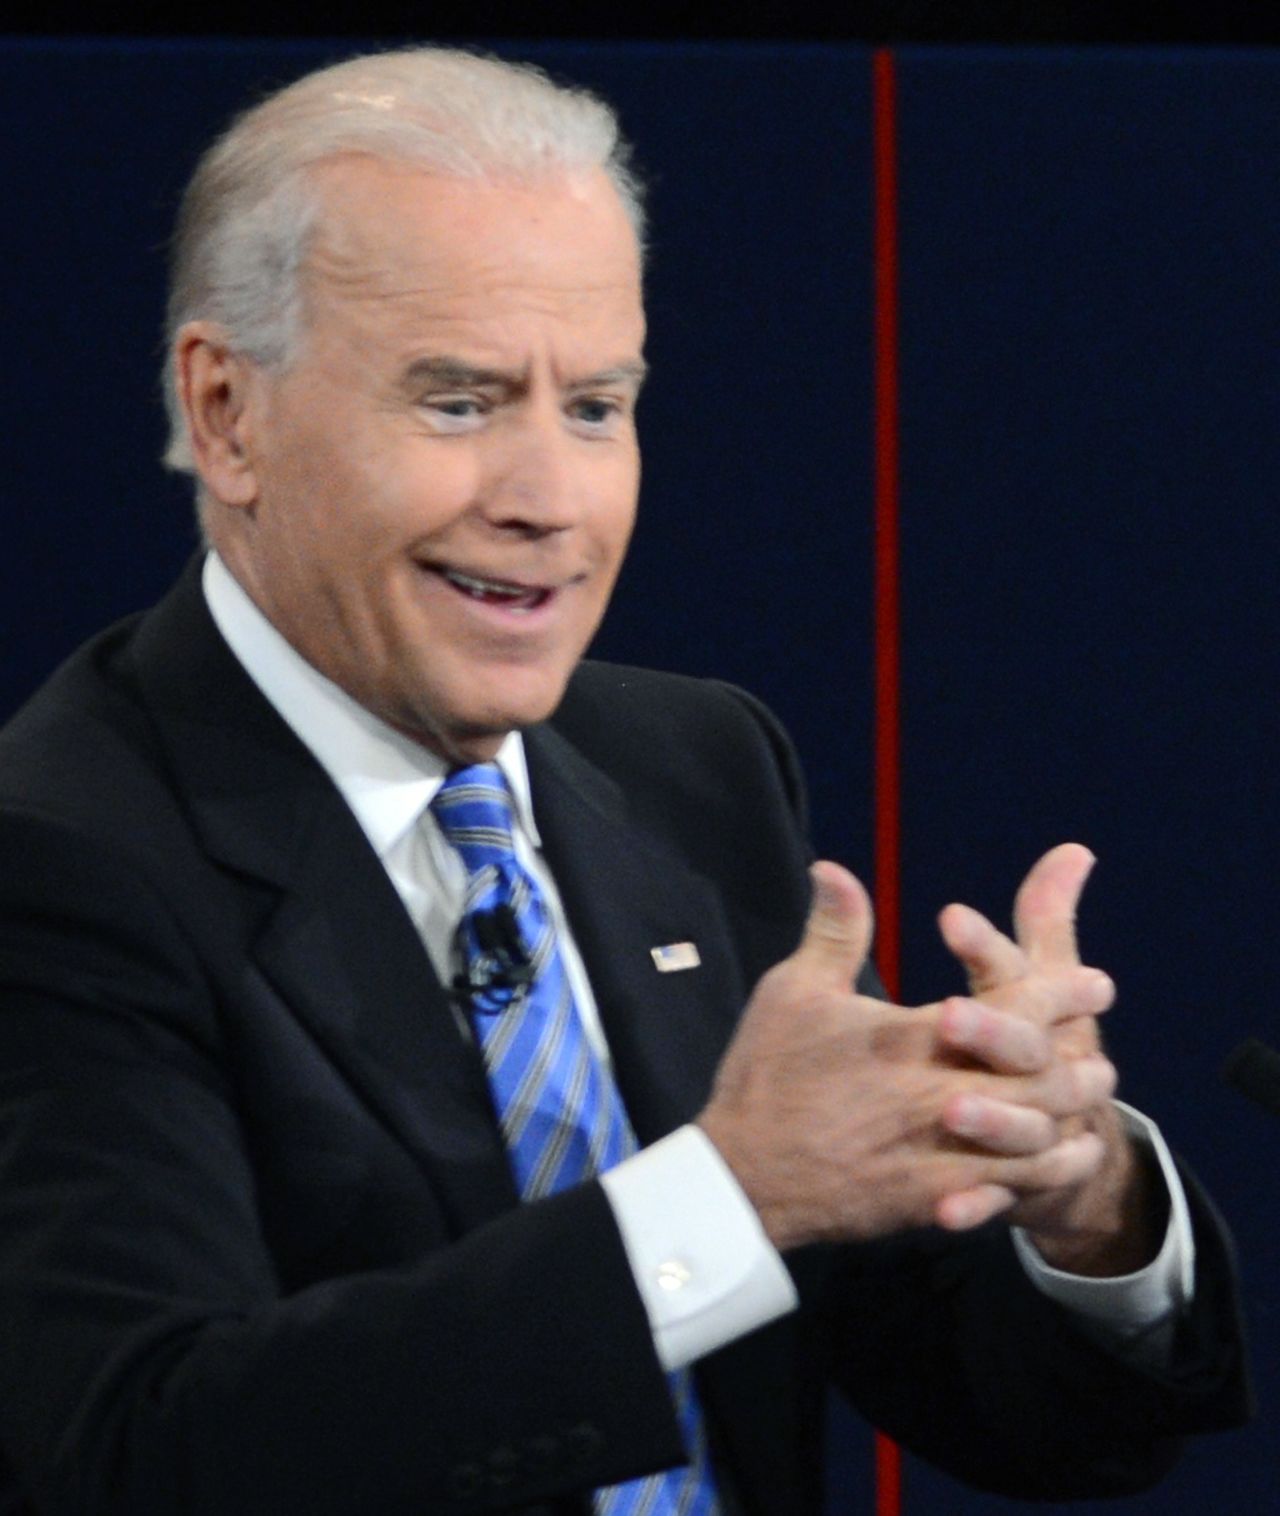 Vice President Biden gestures to accentuate his point.